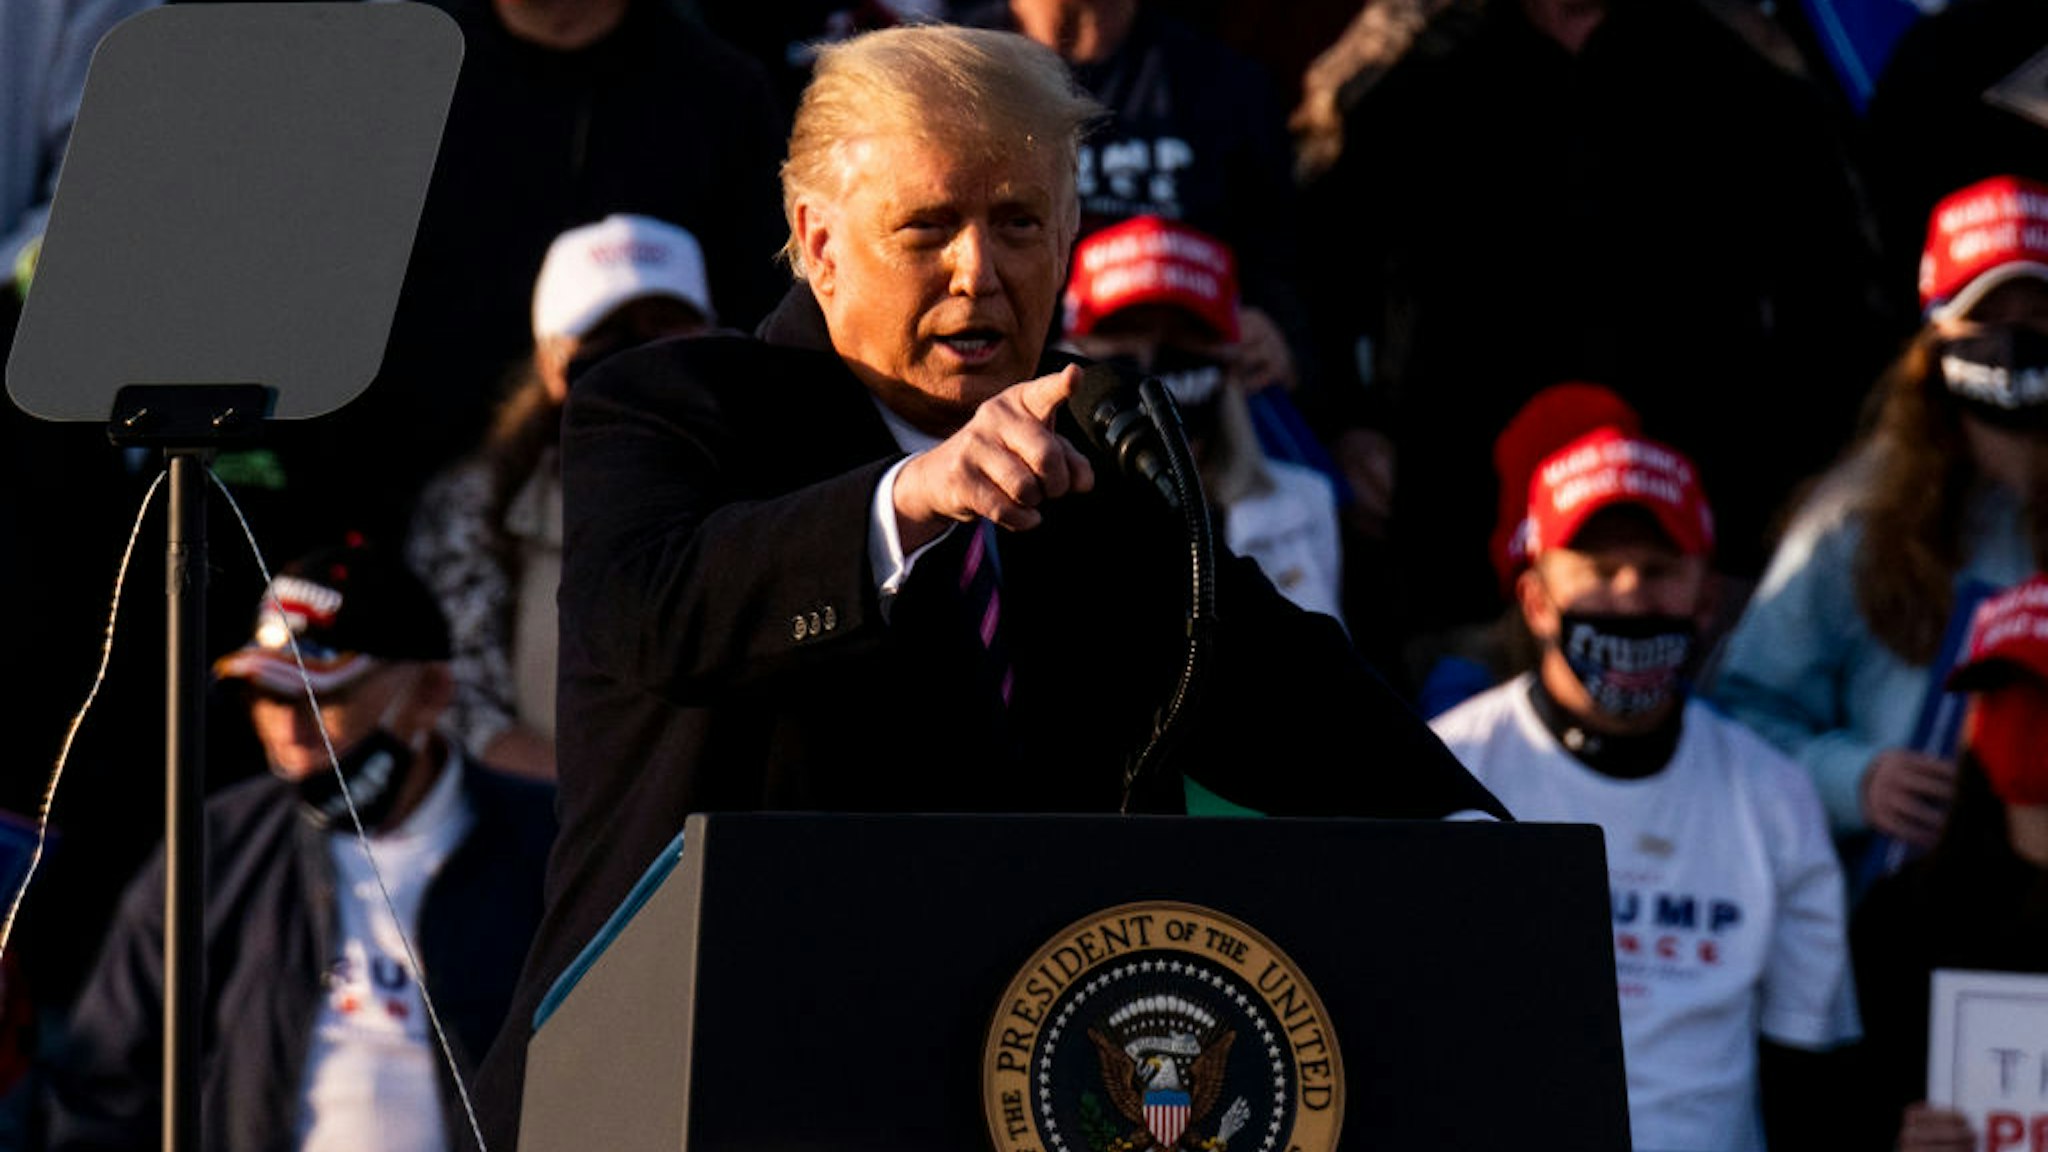 President Donald Trump speaks to supporters during a rally at the Bemidji Regional Airport on September 18, 2020 in Bemidji, Minnesota.